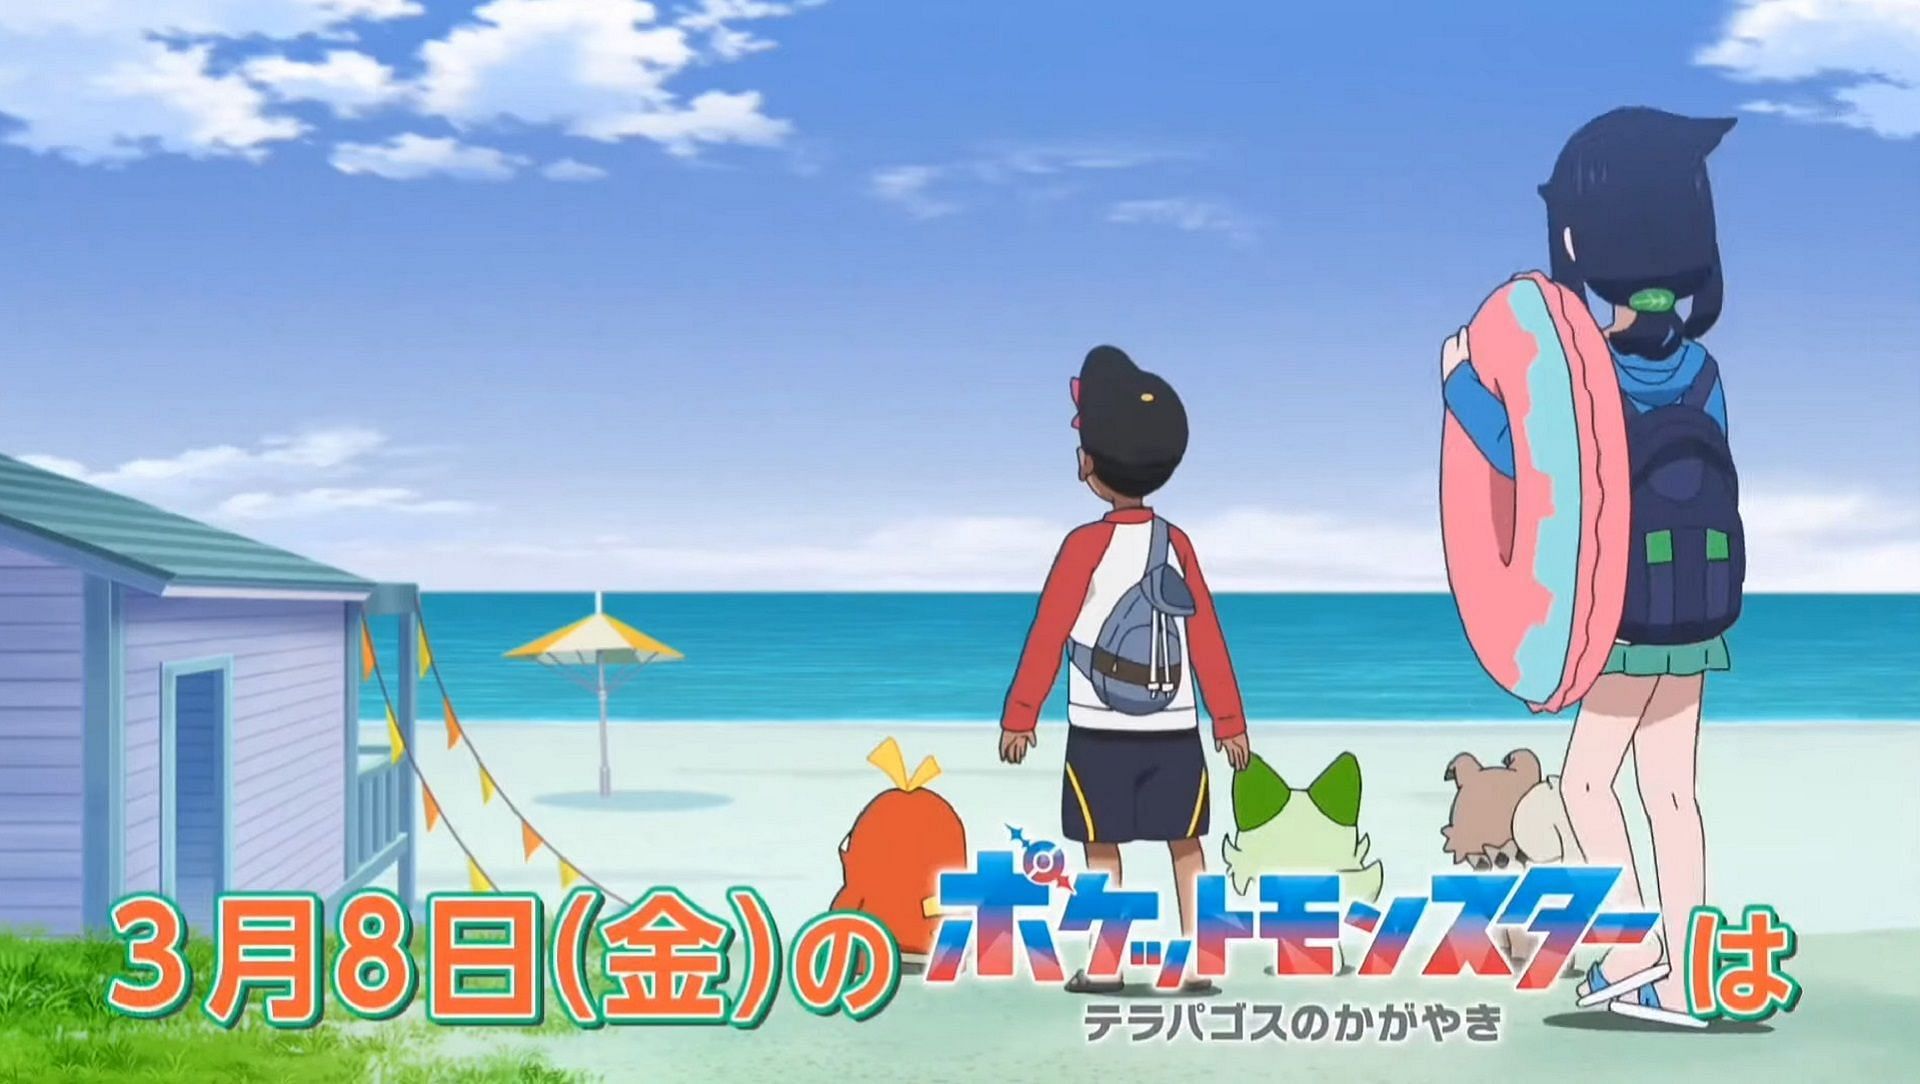 Our Pokemon Horizons heroes hit the beach in Episode 42 (Image via The Pokemon Company)